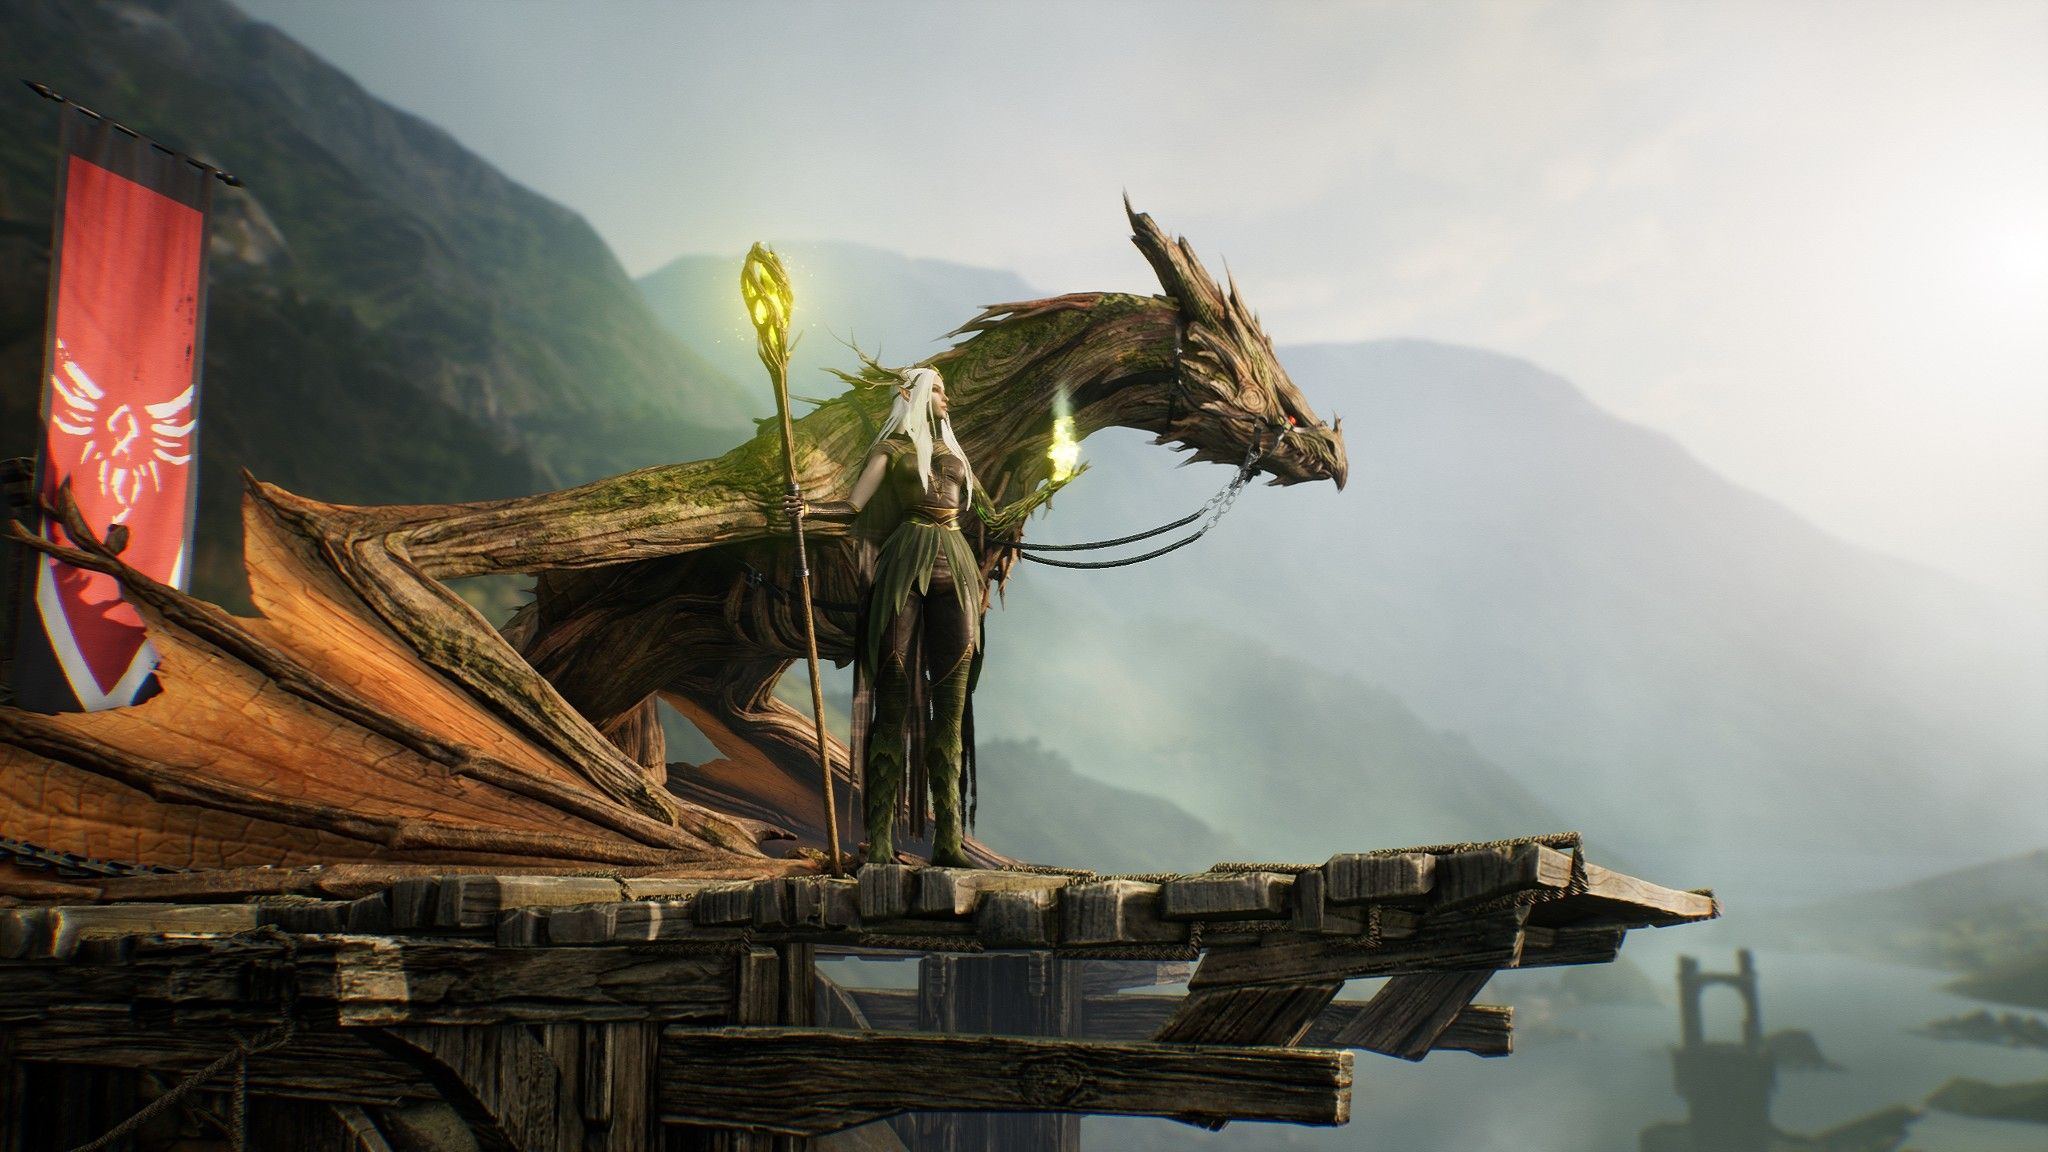 Horn: New Thornweaver class Age of Ashes and a dragon standing together on a ledge.